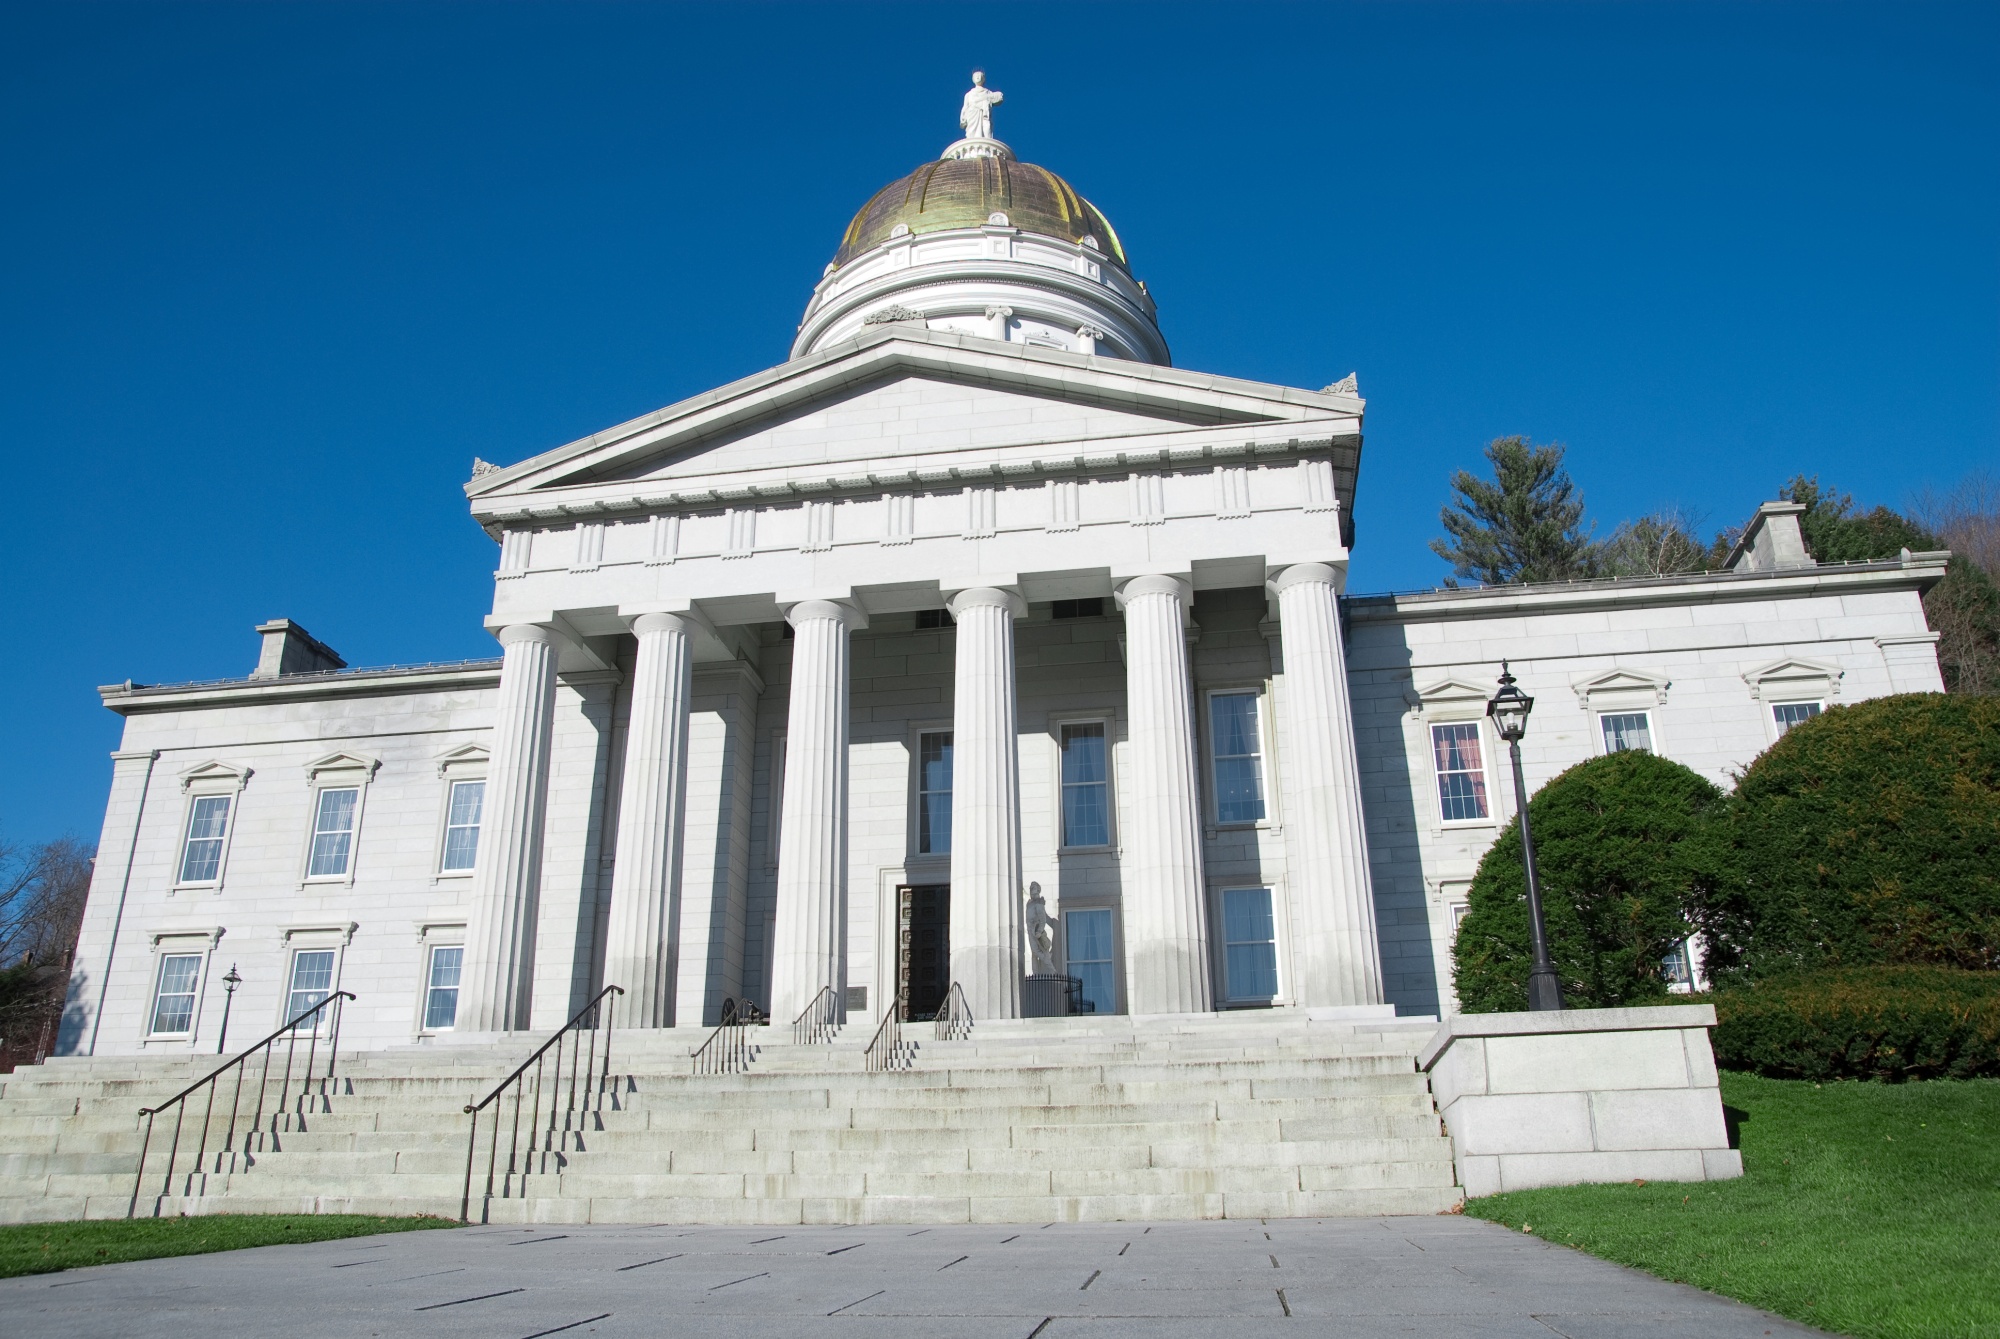 Vermont is one of 11 states—including California, Florida, Hawaii, Minnesota, Nevada, New Hampshire, North Carolina, Texas, Utah, and Washington—that have been&nbsp;taxing PPP loans or considering it. The legislature in Montpelier&nbsp;last month moved to repeal the levy.